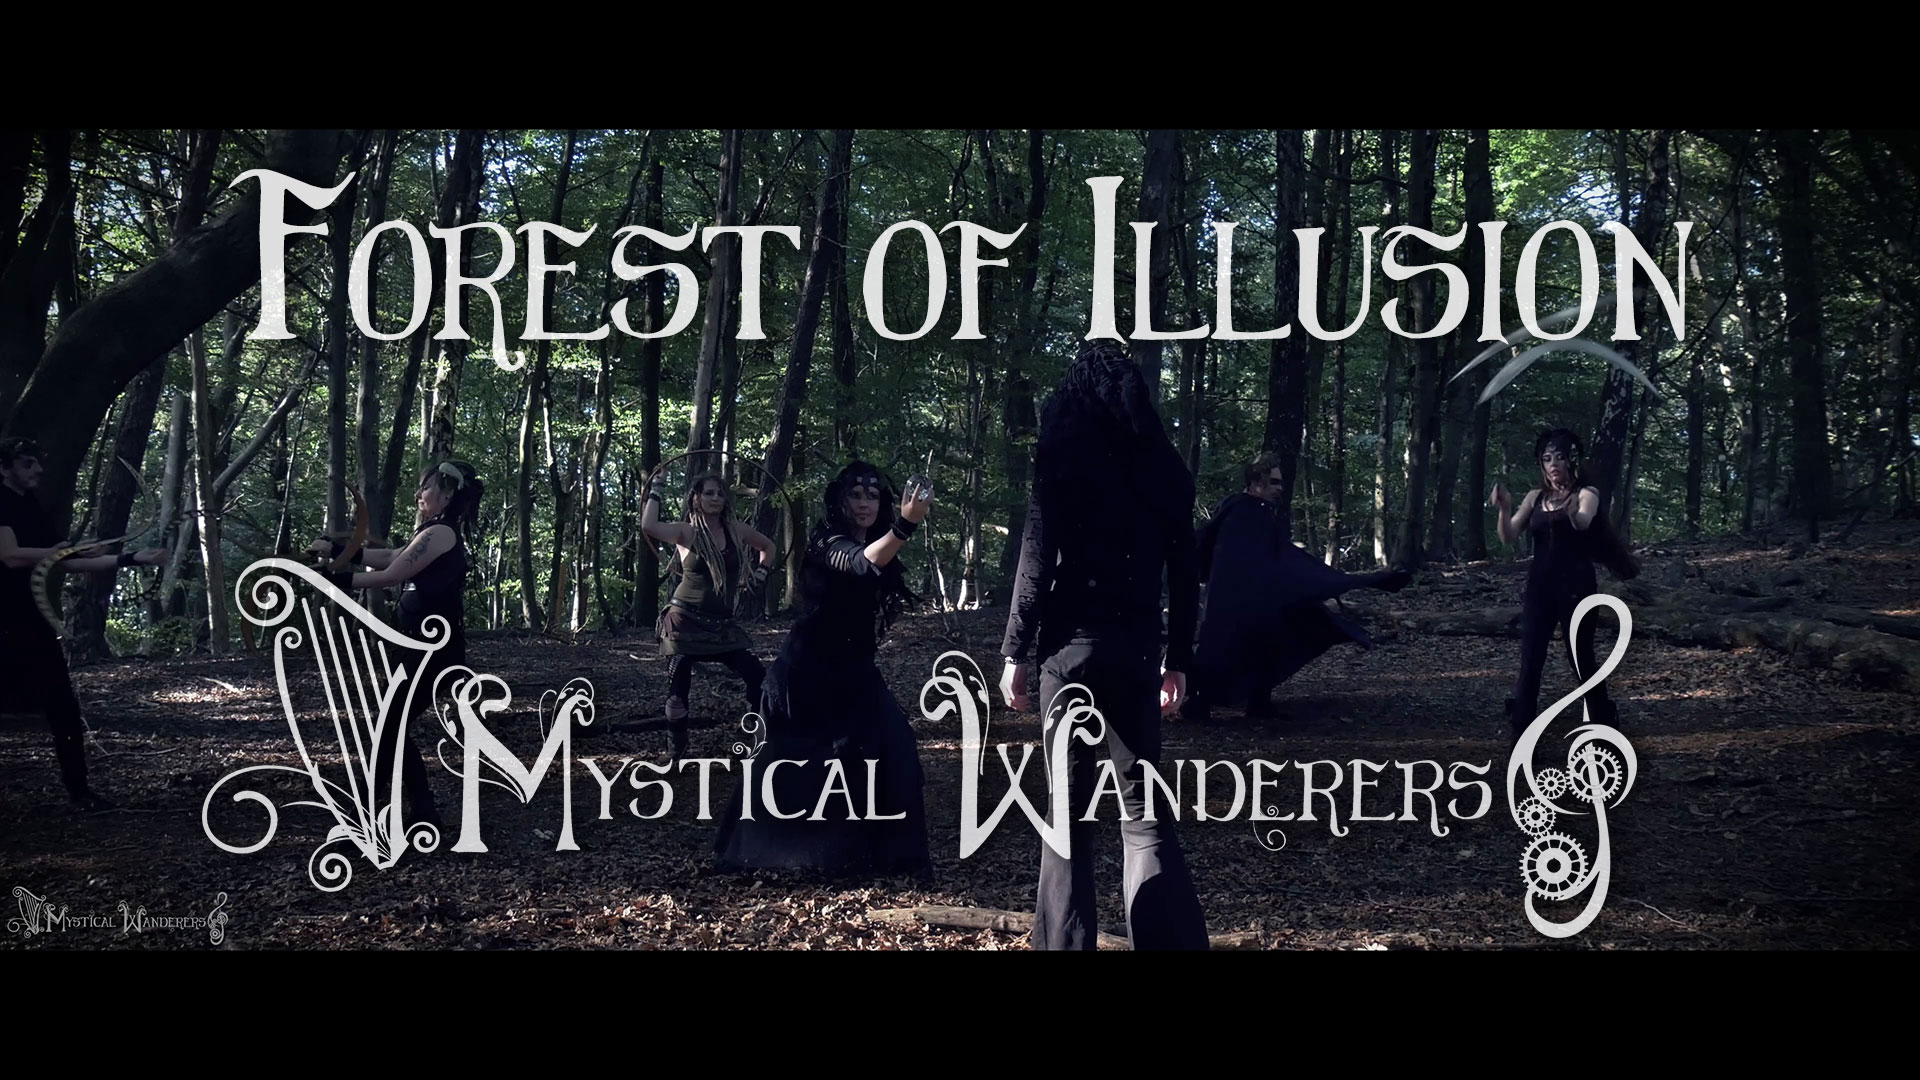 Mystical Wanderers Forest of Illusion Video Thumbnail